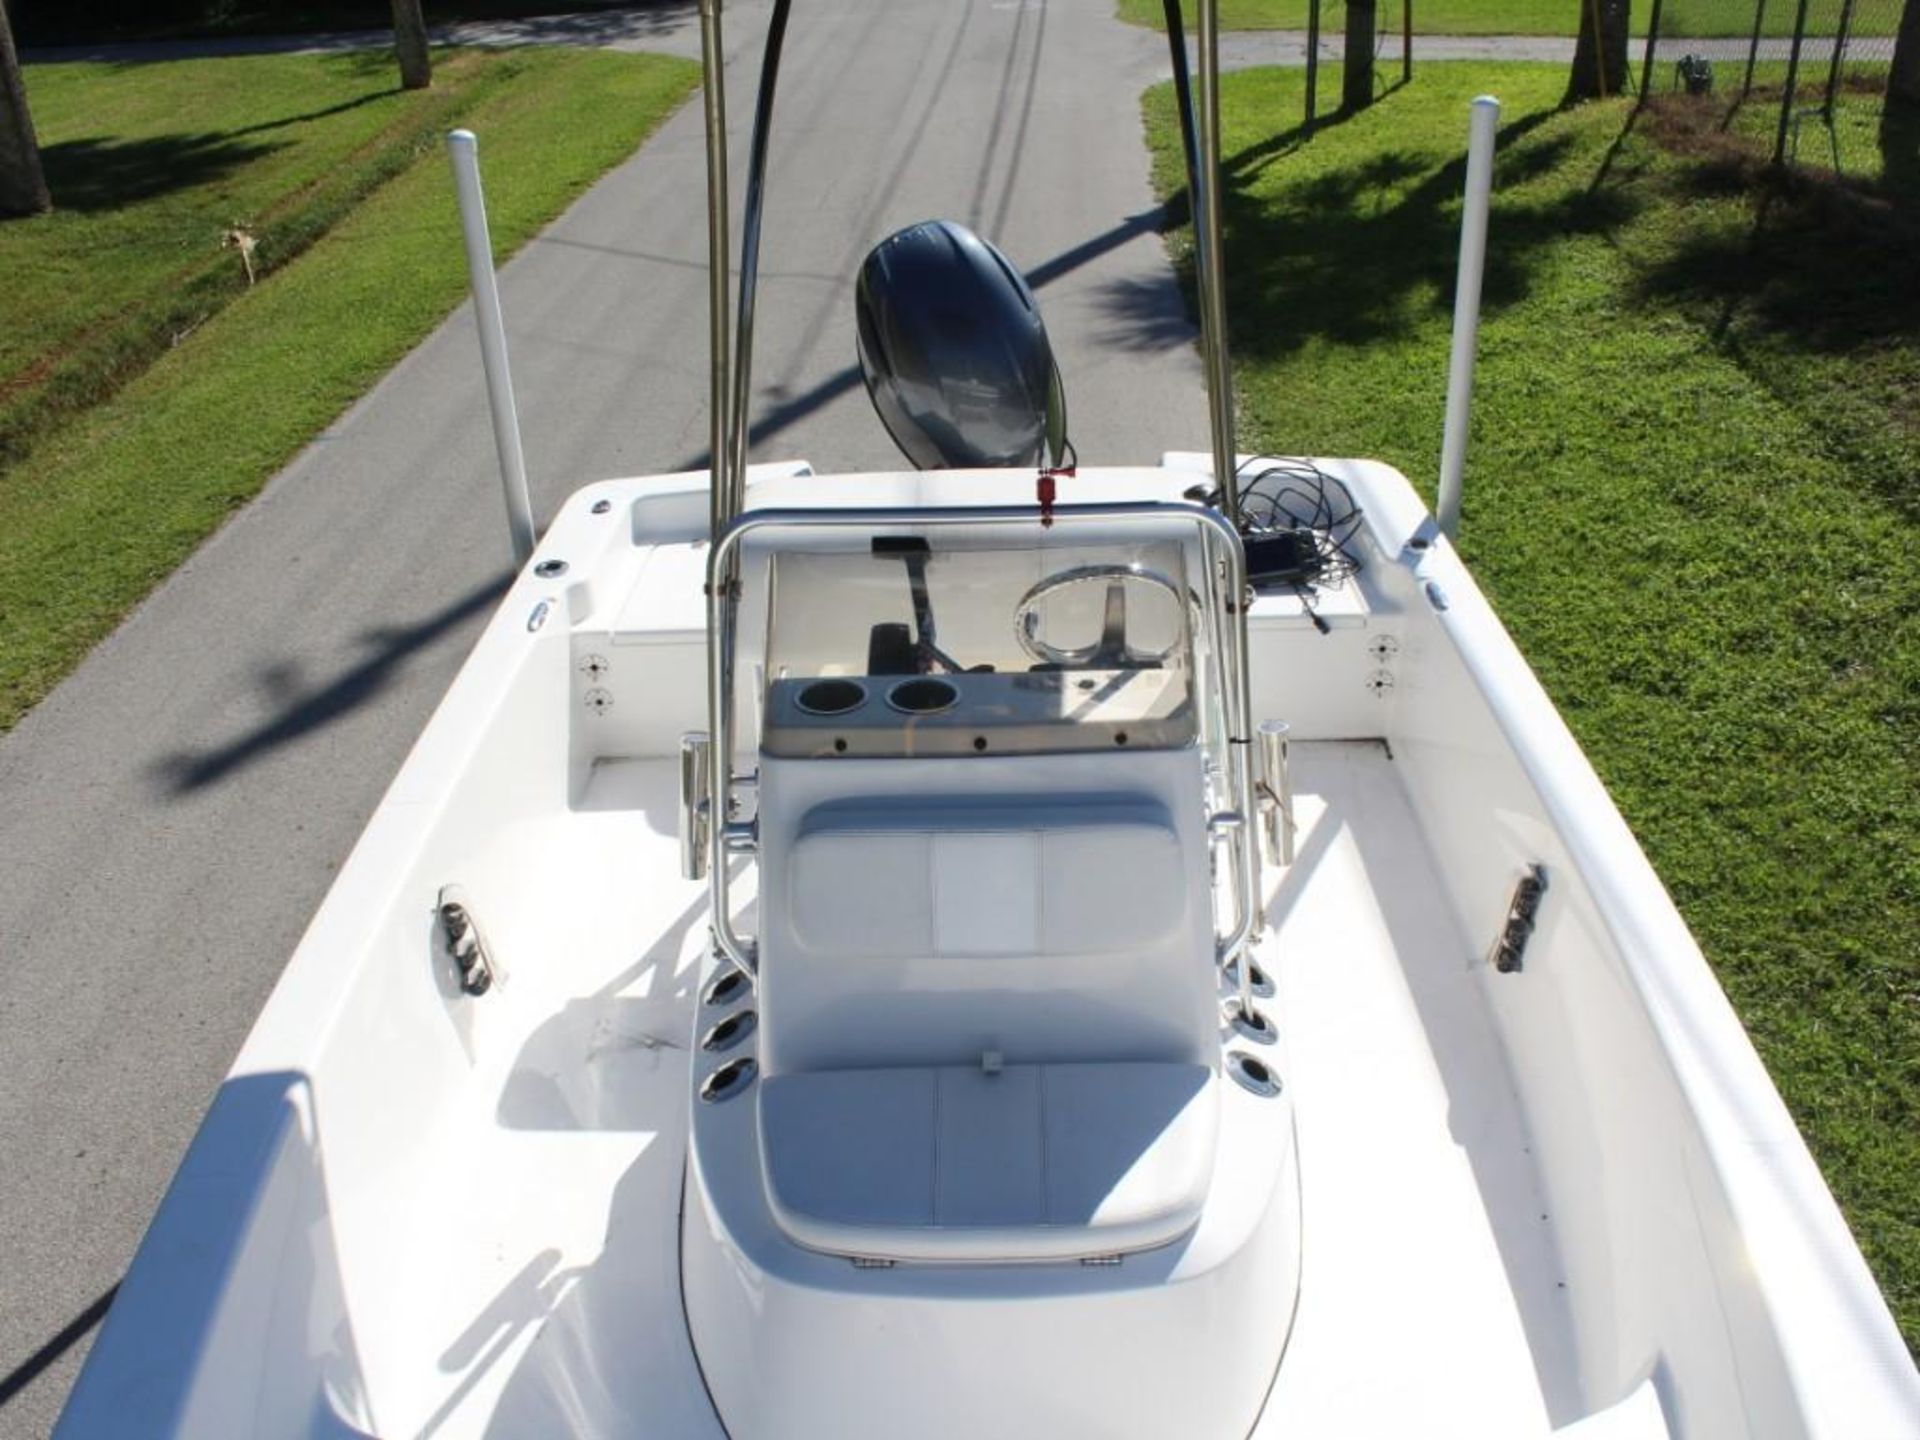 2018 K2M VS CENTER CONSOLE BOAT WITH TRAILER, YAMAHA MOTOR - Image 11 of 26